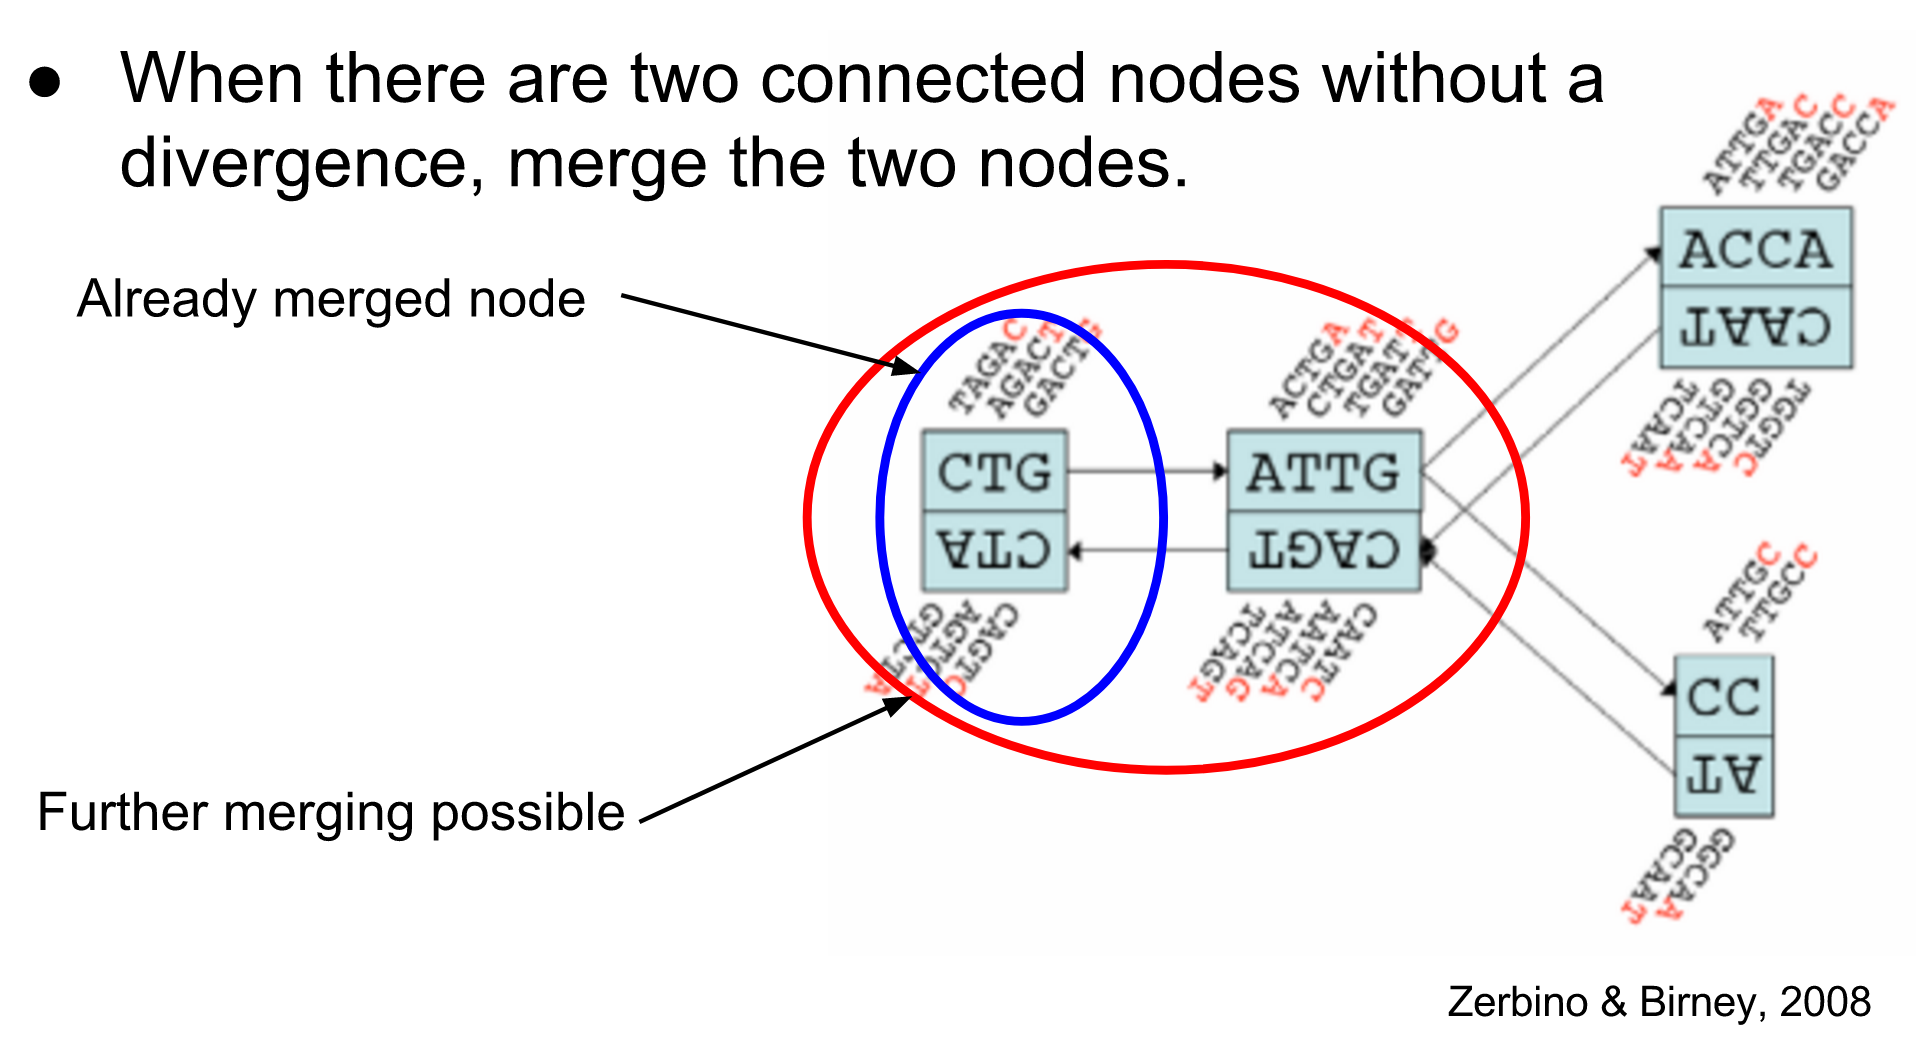 Looking at a doubly connected graph with forward/reverse sequences and piles of overlaps. Nodes are connected with lines. One node is labelled as already merged, and two nodes sharing a prefix are labelled as further merging possible.